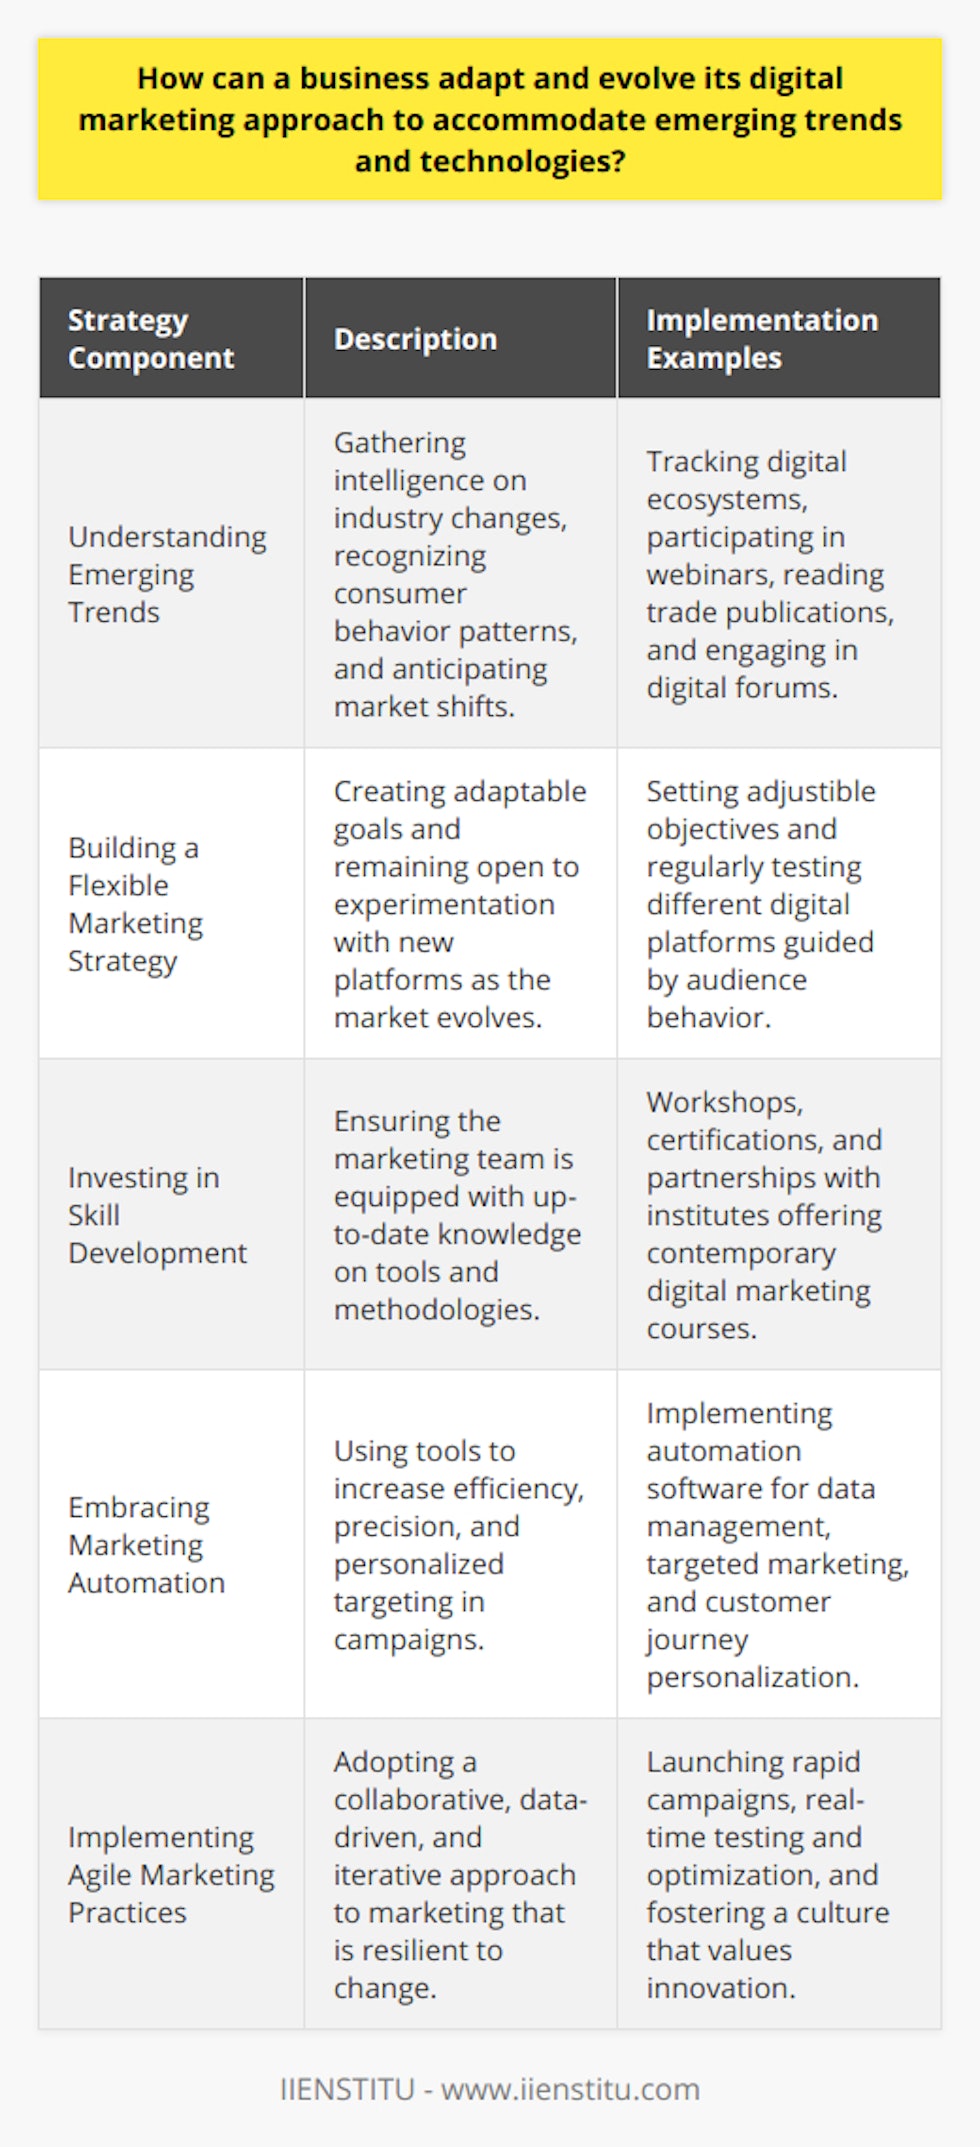 In today's digital age, adapting and evolving a business's digital marketing strategy to include emerging trends and technologies is crucial to stay relevant and competitive. Here's how businesses can approach this transformation:Understanding Emerging Trends:Staying current with industry changes involves constant learning and observation. Businesses should gather intelligence by tracking digital ecosystems, participating in webinars, and joining digital forums. Trade publications, thought leader insights, and case studies are also critical sources of information. Recognizing patterns in consumer behavior and anticipating shifts can provide a competitive advantage.Building a Flexible Marketing Strategy:Flexibility is key when dealing with the fast-paced nature of digital marketing. Businesses should not only set clear but flexible goals that can adjust as the market evolves but also remain open to experimenting with new platforms and technologies. This strategy should pivot around the needs and behaviors of target audiences, recognizing that these can change rapidly with the advent of new digital trends.Investing in Skill Development:With the constant arrival of new tools and methodologies, it's imperative to continually invest in the professional development of the marketing team. This could be facilitated through workshops, certifications, or partnerships with educational platforms like IIENSTITU, which specialize in contemporary digital marketing courses. Skill development allows teams to confidently embrace new technologies and apply them to marketing strategies effectively.Embracing Marketing Automation:Marketing automation tools not only save time but also increase efficiency and accuracy of marketing campaigns. They allow for better data management, targeted marketing, and a personalized customer journey. By leveraging automation, businesses can focus on more strategic tasks and ensure they're not missing out on opportunities due to manual process limitations.Implementing Agile Marketing Practices:Agile marketing involves a collaborative, fast-paced approach that welcomes changes and rapid iteration based on feedback and data analytics. By adopting agile practices, marketing teams can deploy campaigns more quickly, test their effectiveness in real-time, and tweak them to enhance performance. This entails a cultural shift where businesses encourage innovation, embrace calculated risks, and view failures as learning opportunities.By integrating these strategies into their digital marketing approach, businesses can ensure they remain agile and responsive to the continually evolving digital landscape. In doing so, they not only meet their customers' expectations but also take advantage of new opportunities, cultivating sustainable growth in the ever-changing digital environment.